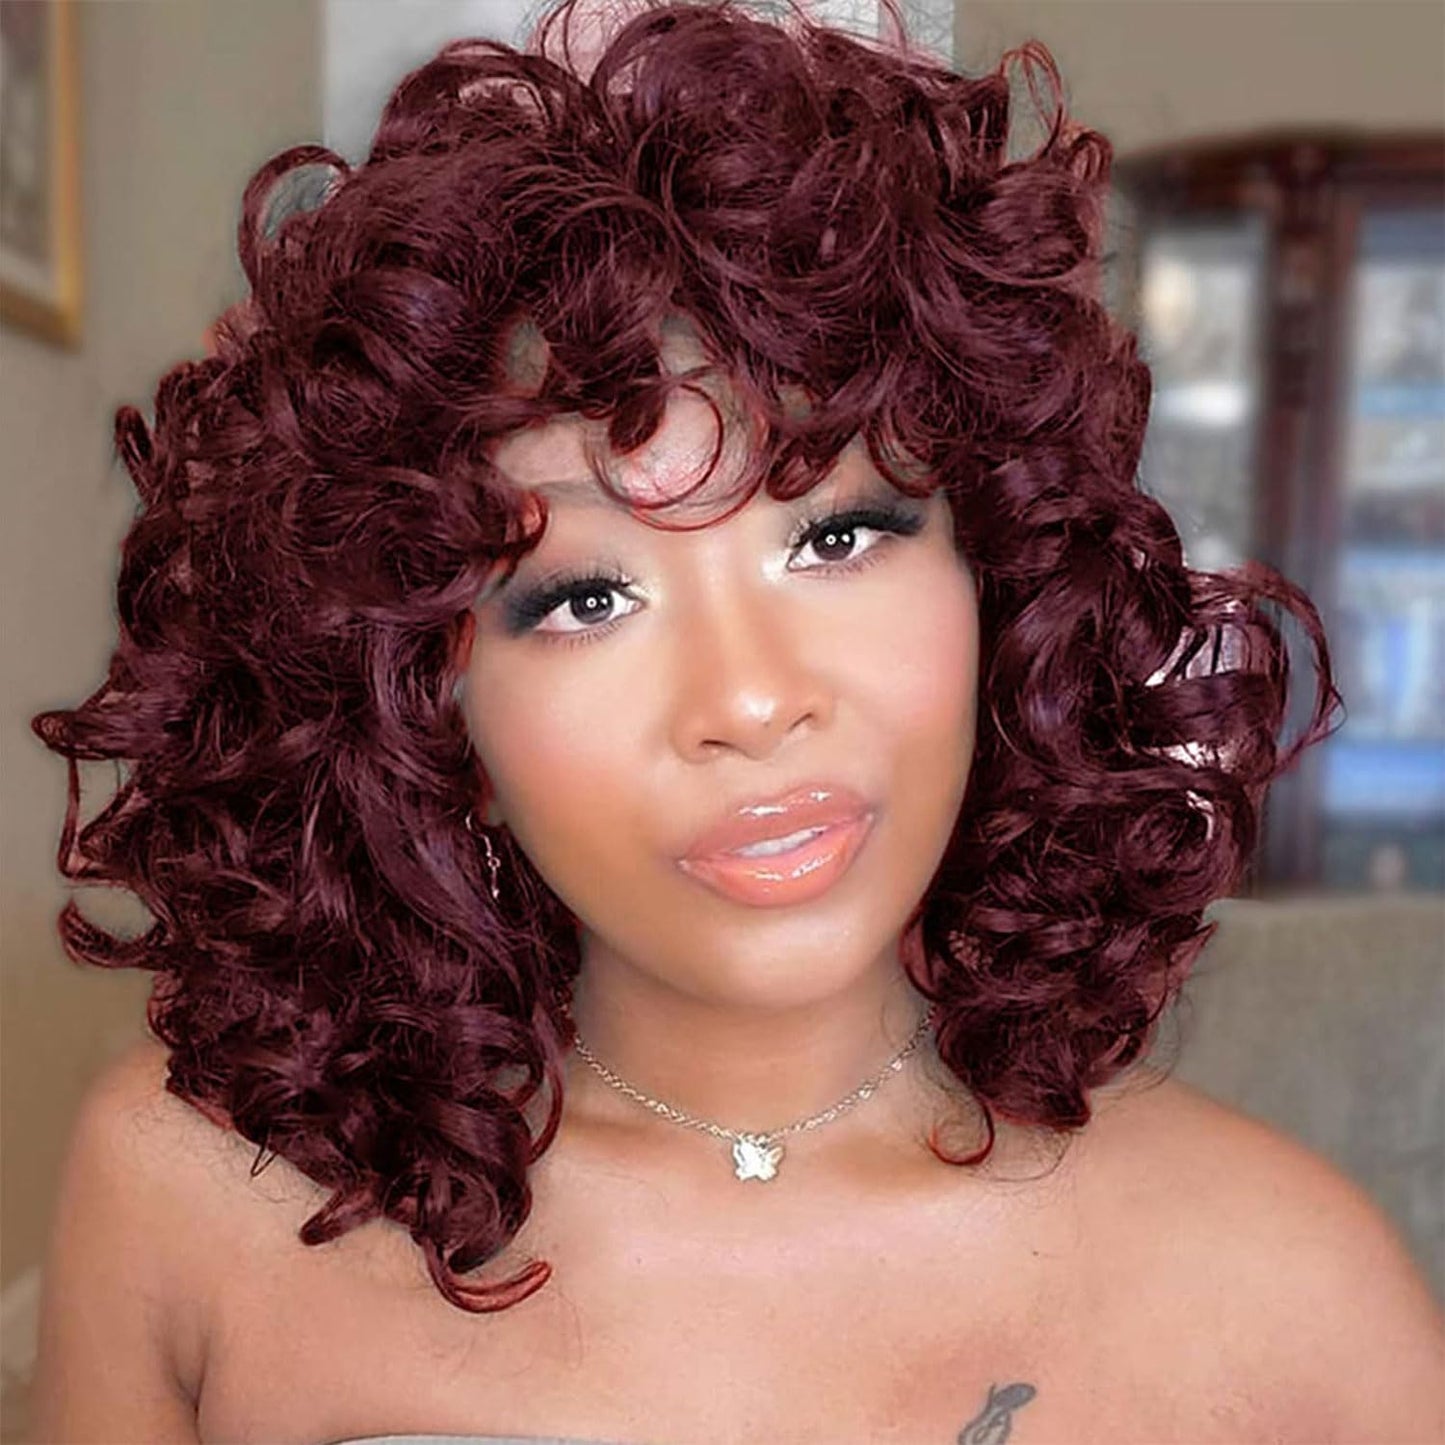 Grey Curly Wig with Bangs.Glueless Wear and Go Wig Afro Curly Synthetic Wigs Ombre Color Heat Resistant Short Curly Wigs Natural Looking Hair for Daily Party Use (1B/Grey)